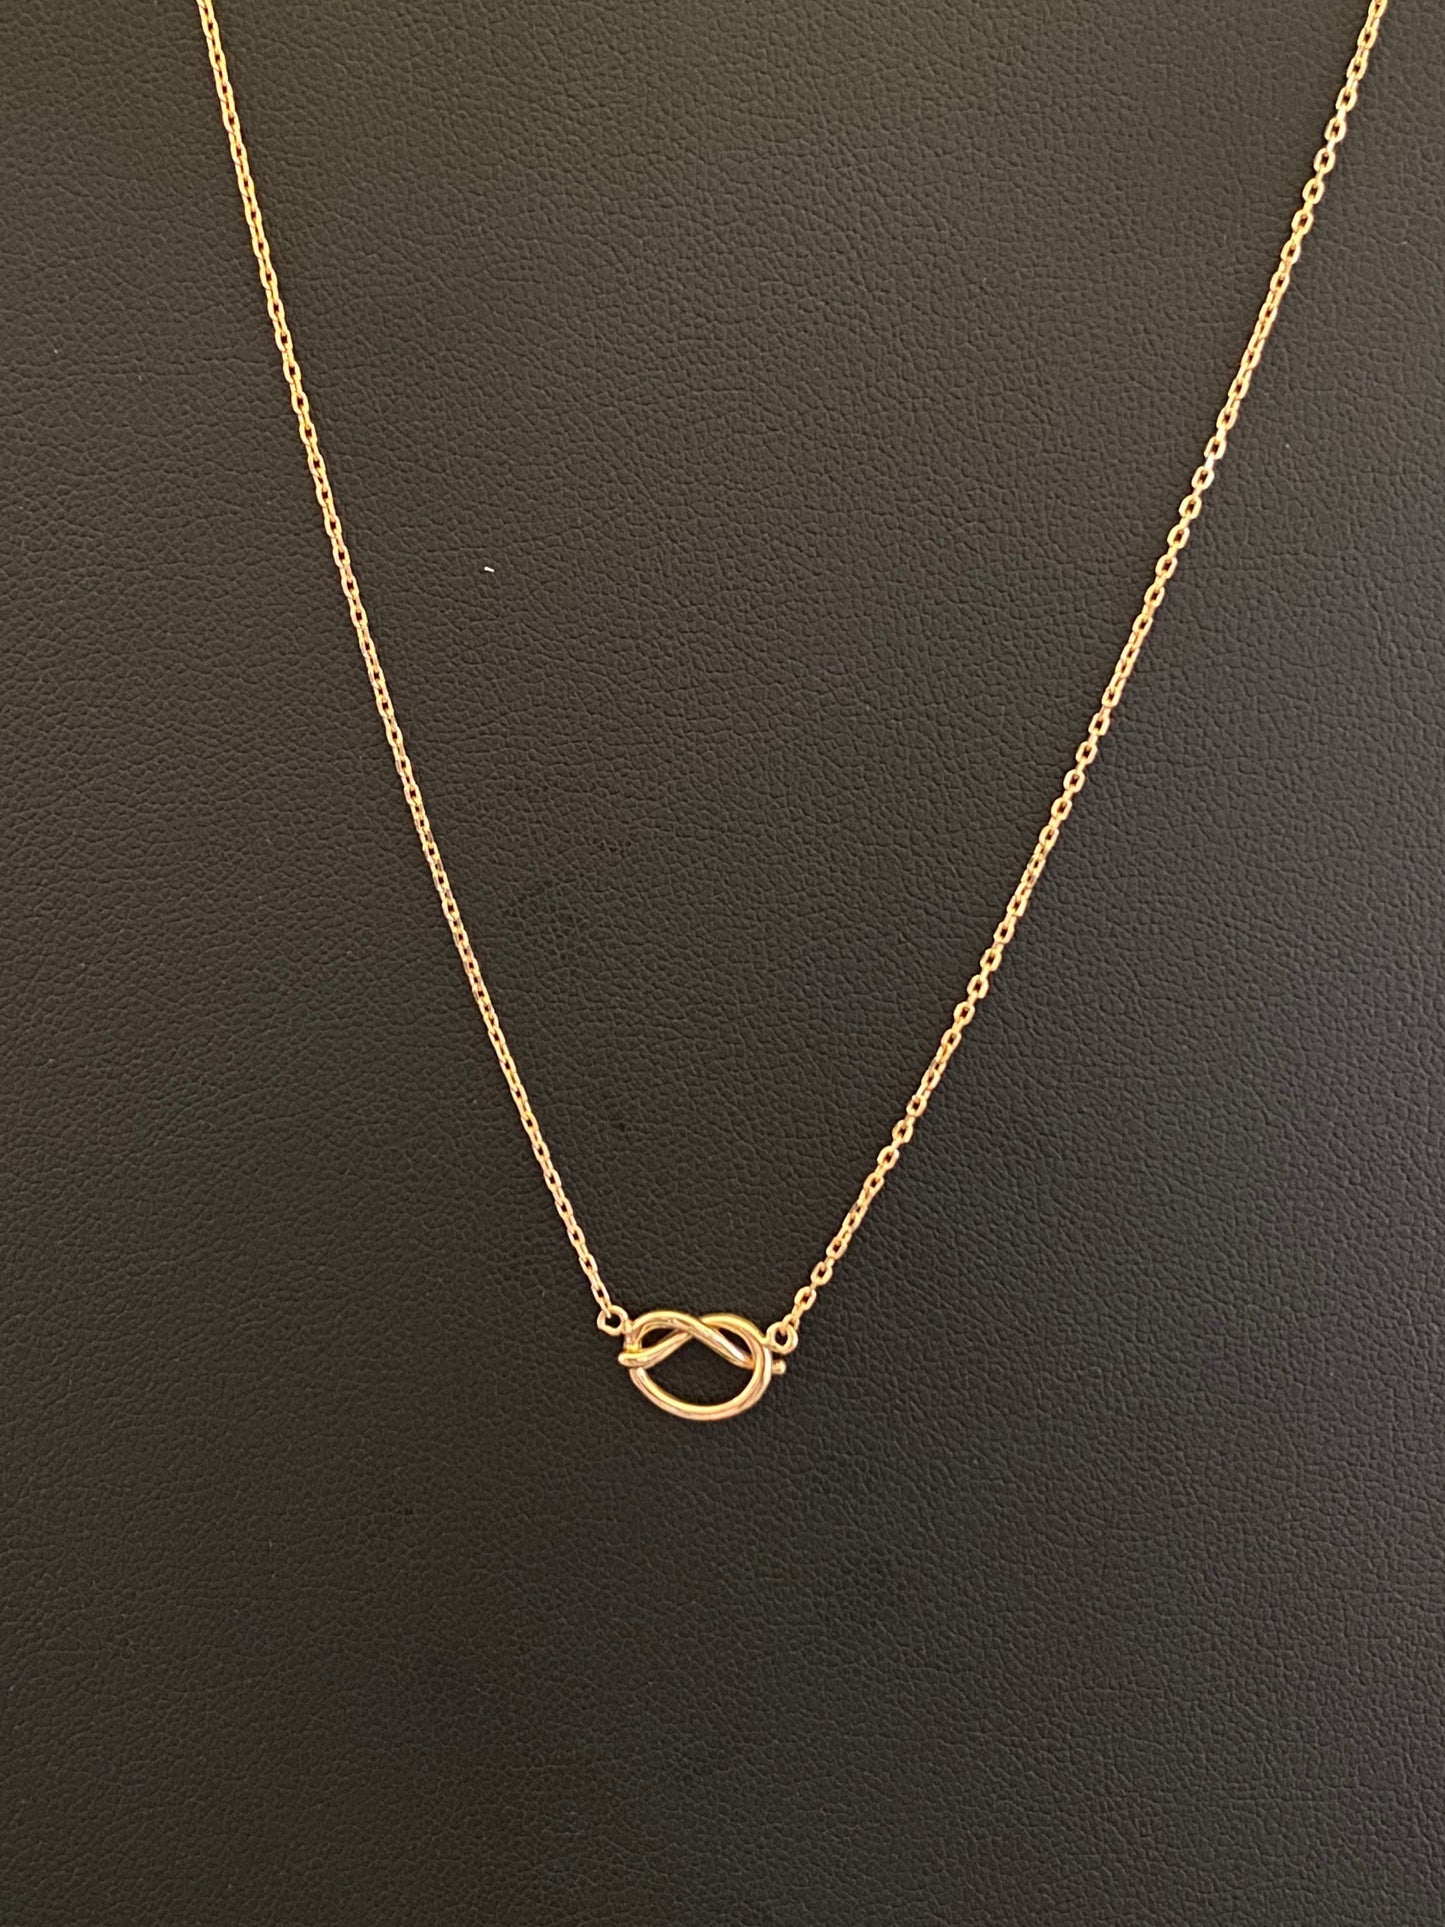 Yellow Love Knot Pendant Adjustable Chain Necklace